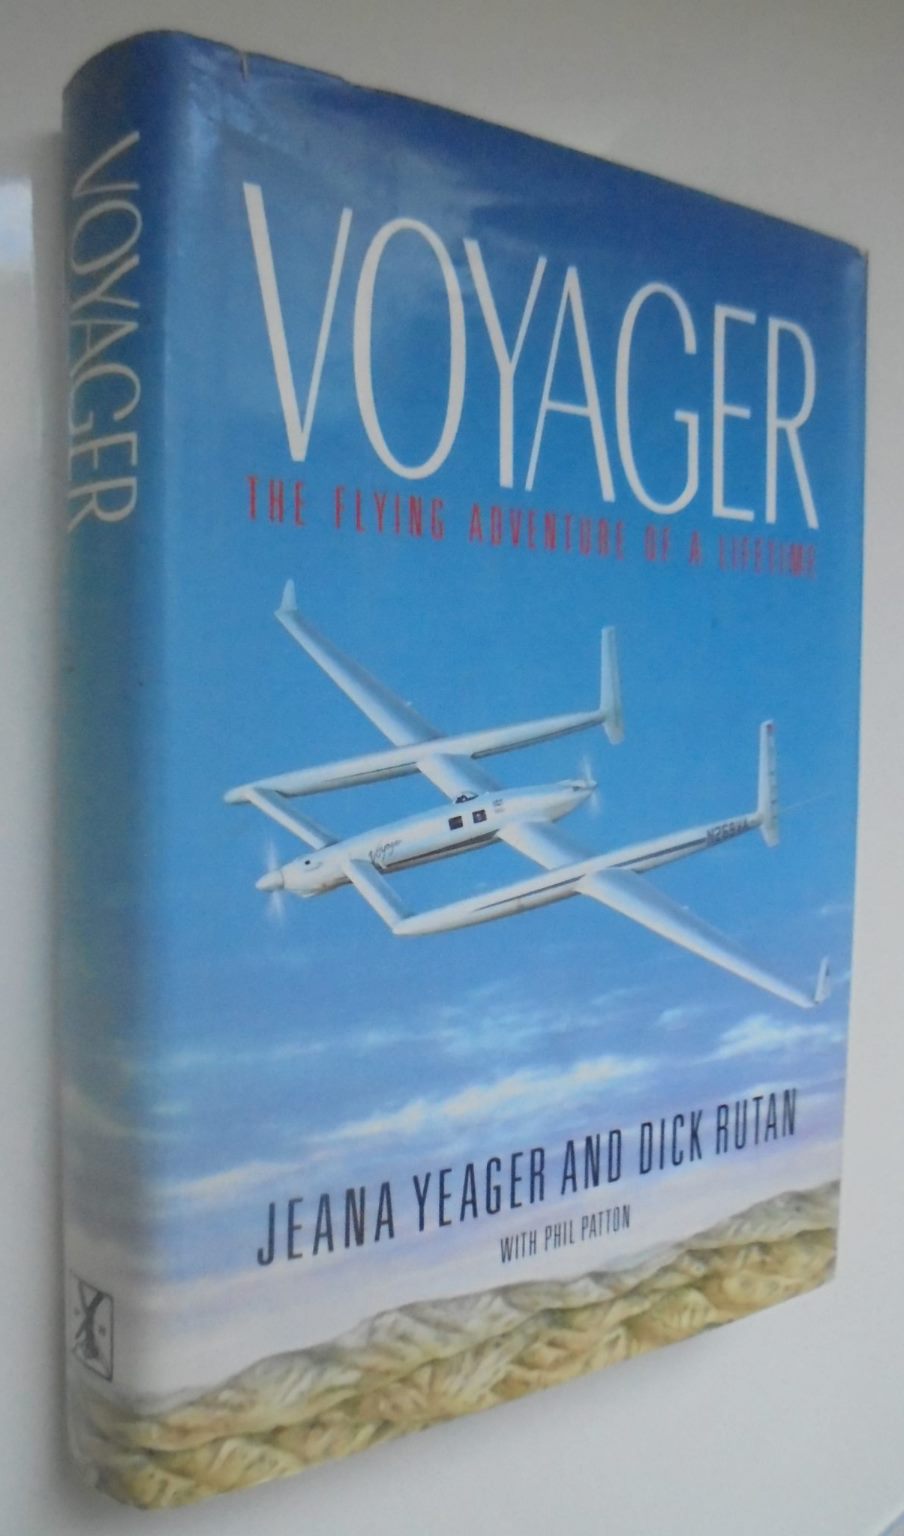 'VOYAGER: THE FLYING ADVENTURE OF A LIFETIME. by Jeana Yeager, Dick Rutan and Phil Patton. Hardback 1st edition.